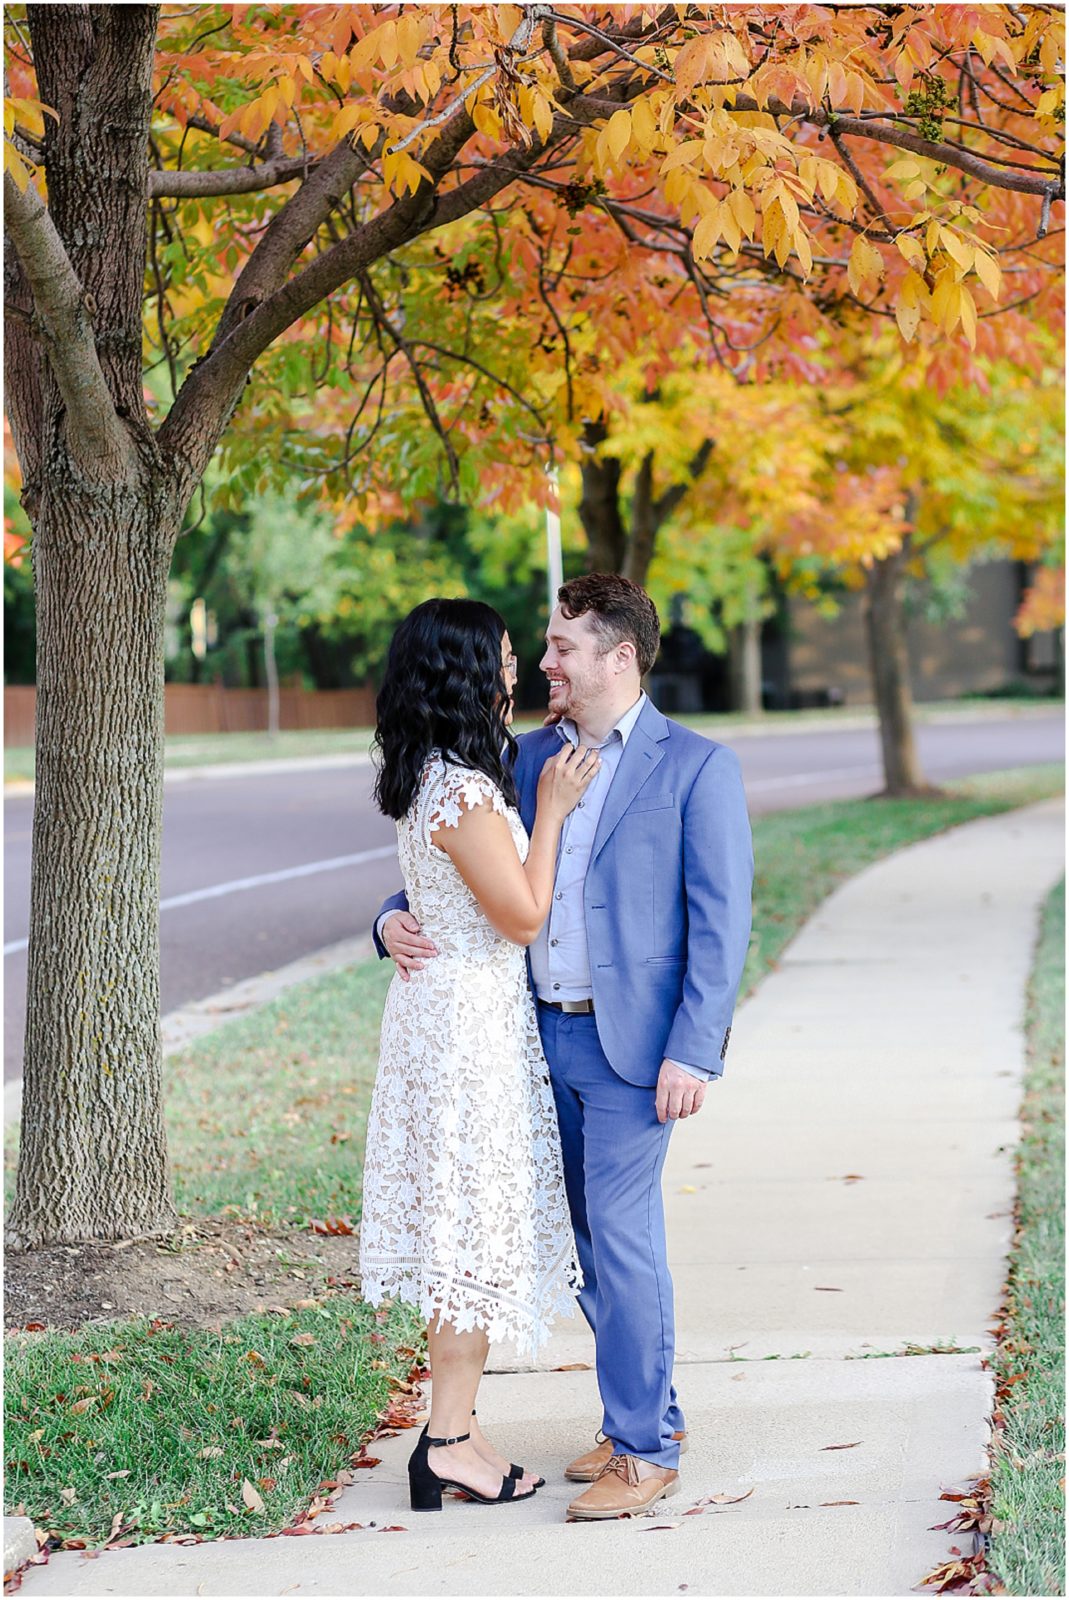 happy couple - how to pose for engagement photos - what to wear for engagement photos - fall foliage - fall engagement photos in kansas city and overland park 